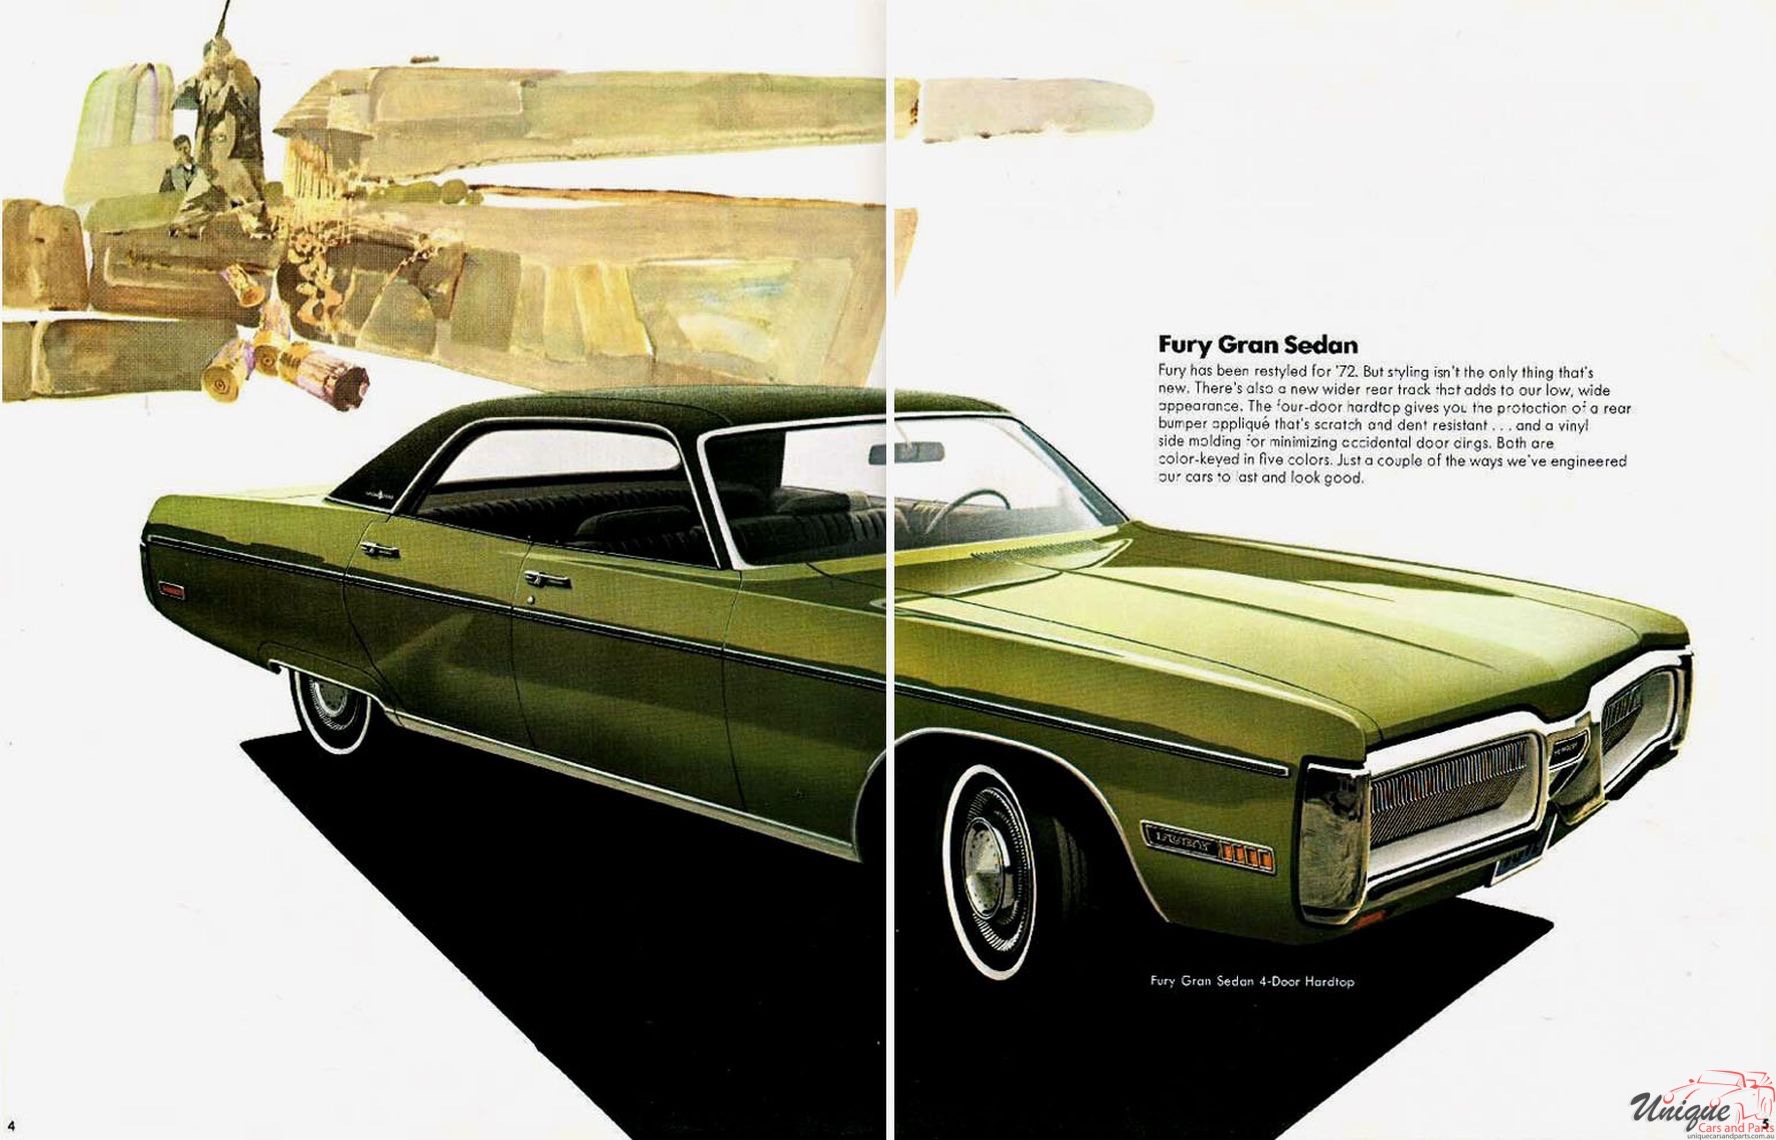 1972 Plymouth Fury Brochure Page 6